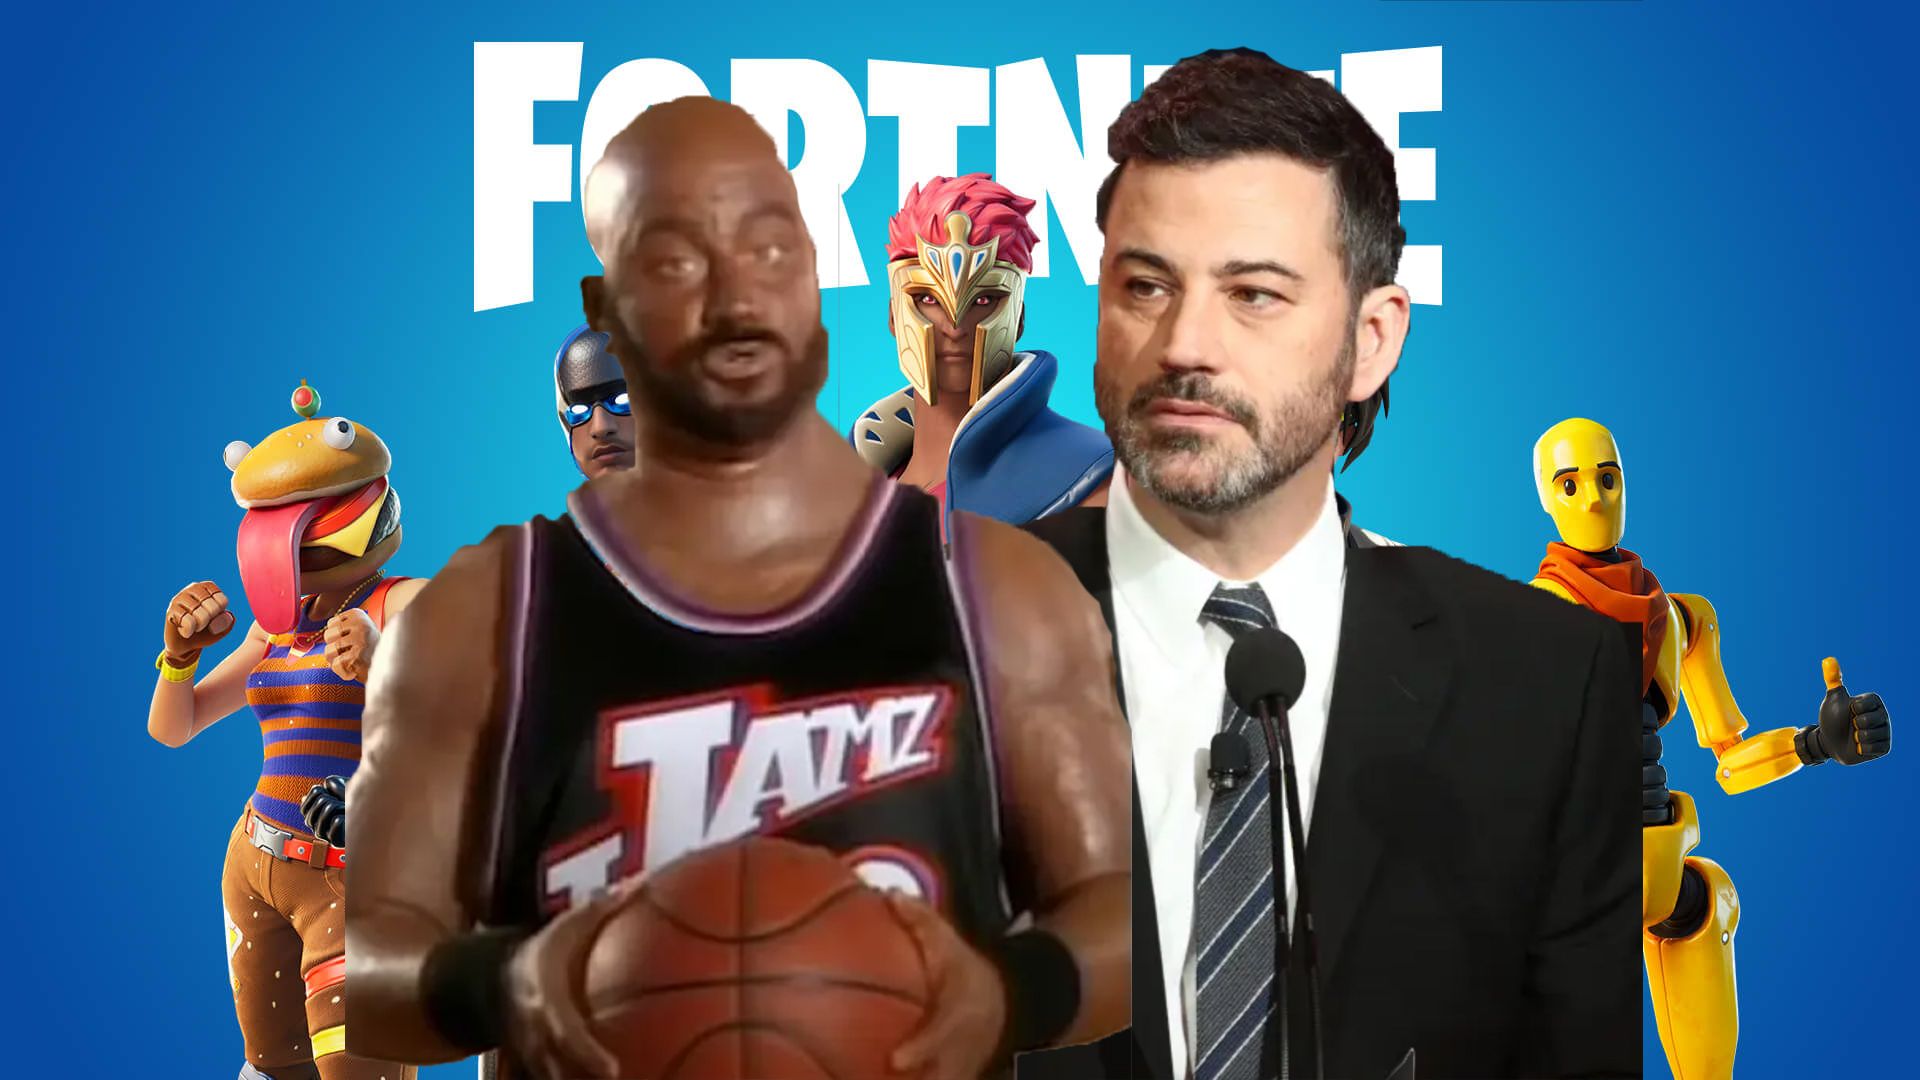 Fortnite Passes On Jimmy Kimmel Collaboration Over Blackface Controversy